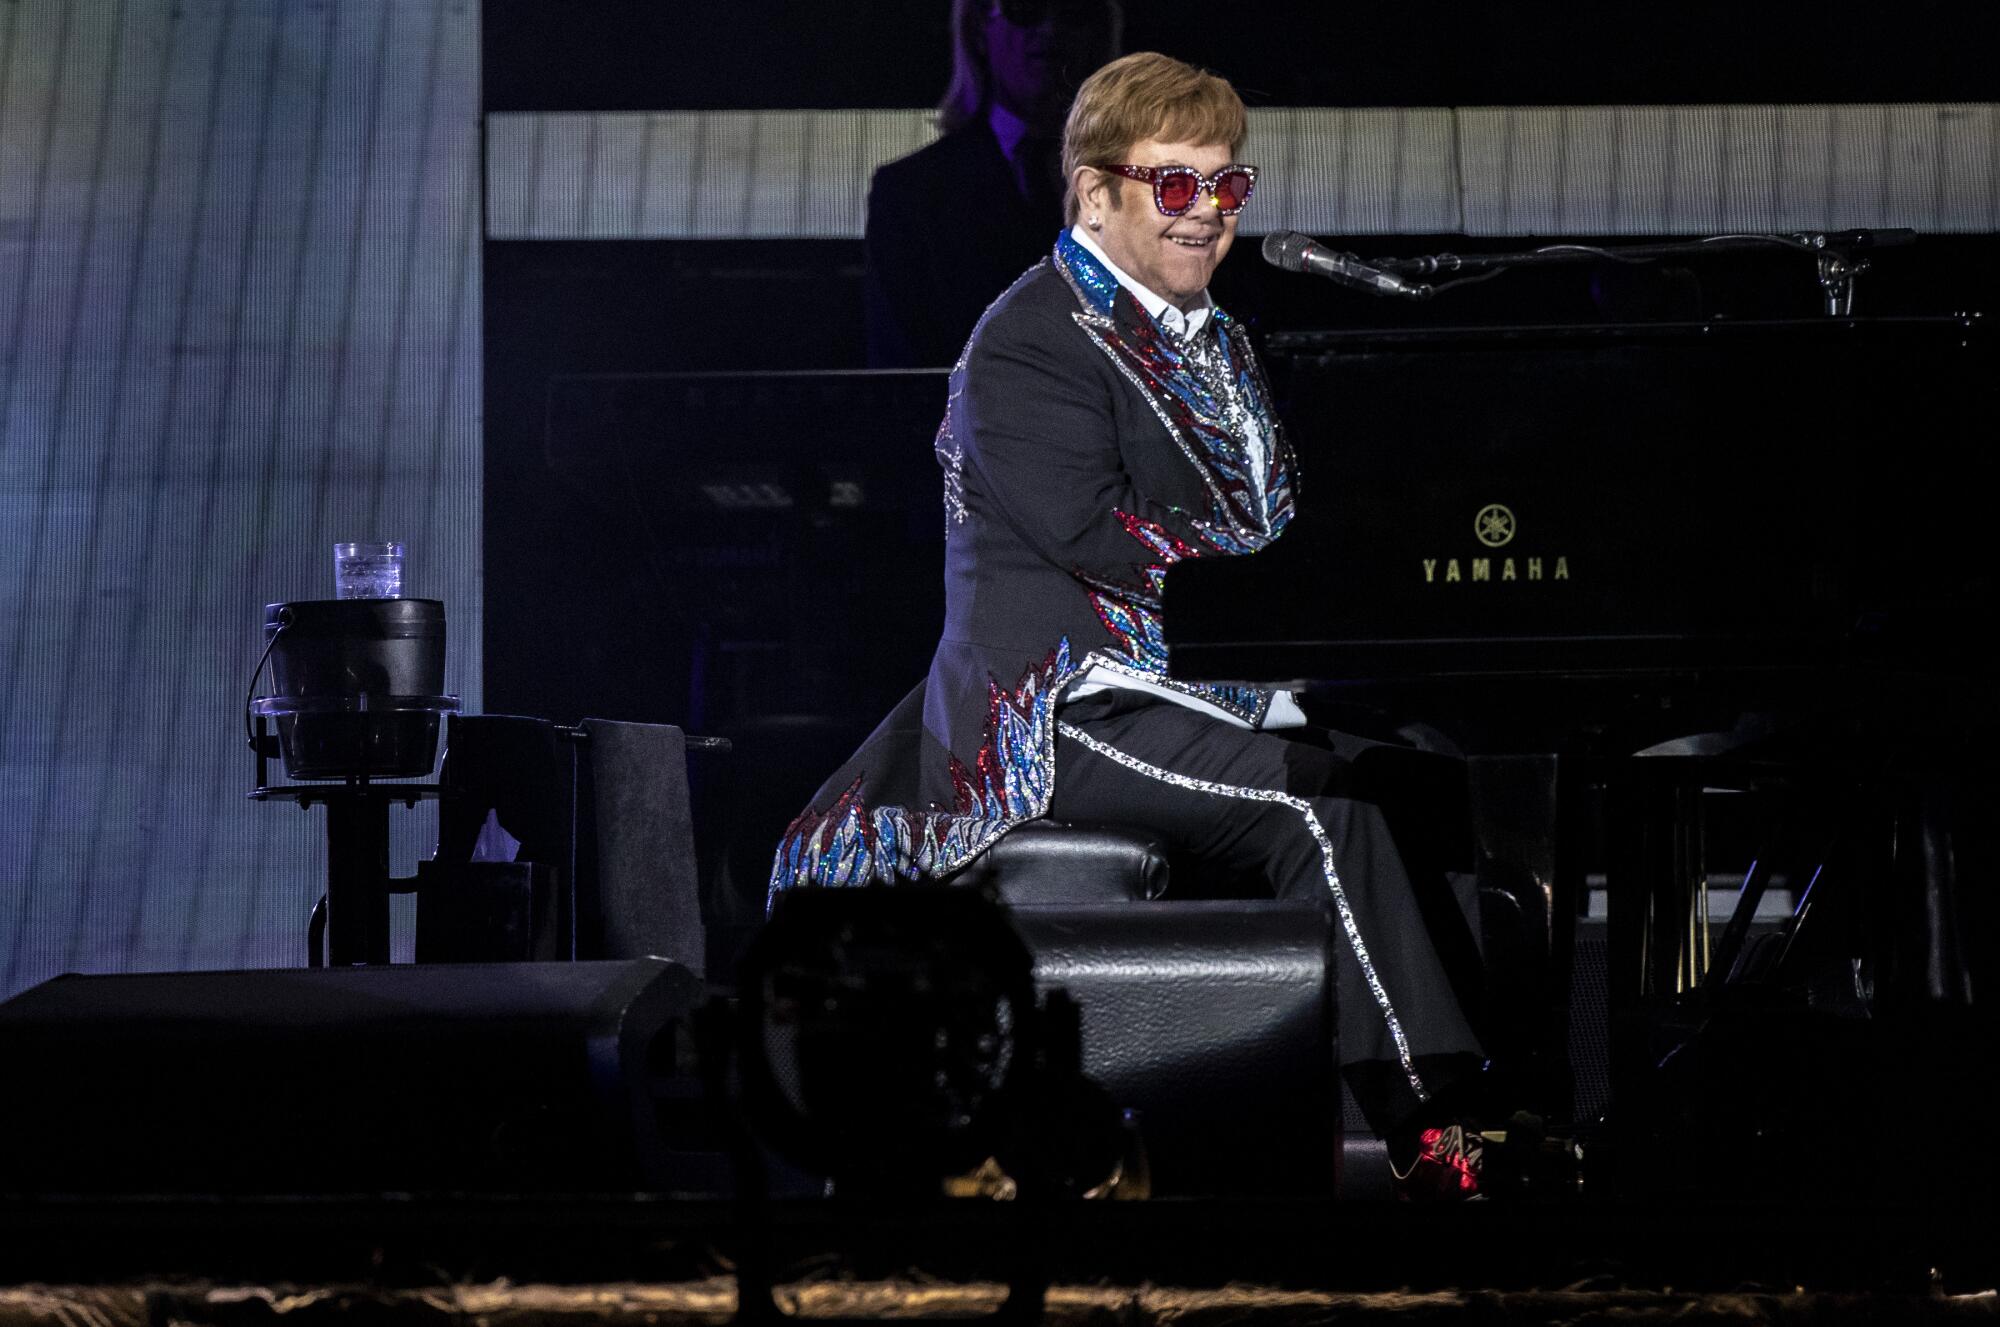 Consequence - Elton John returned to Dodger Stadium after 47 years this  weekend for his final North American concerts. He even wore a new twist on  his sequined Dodger uniform.